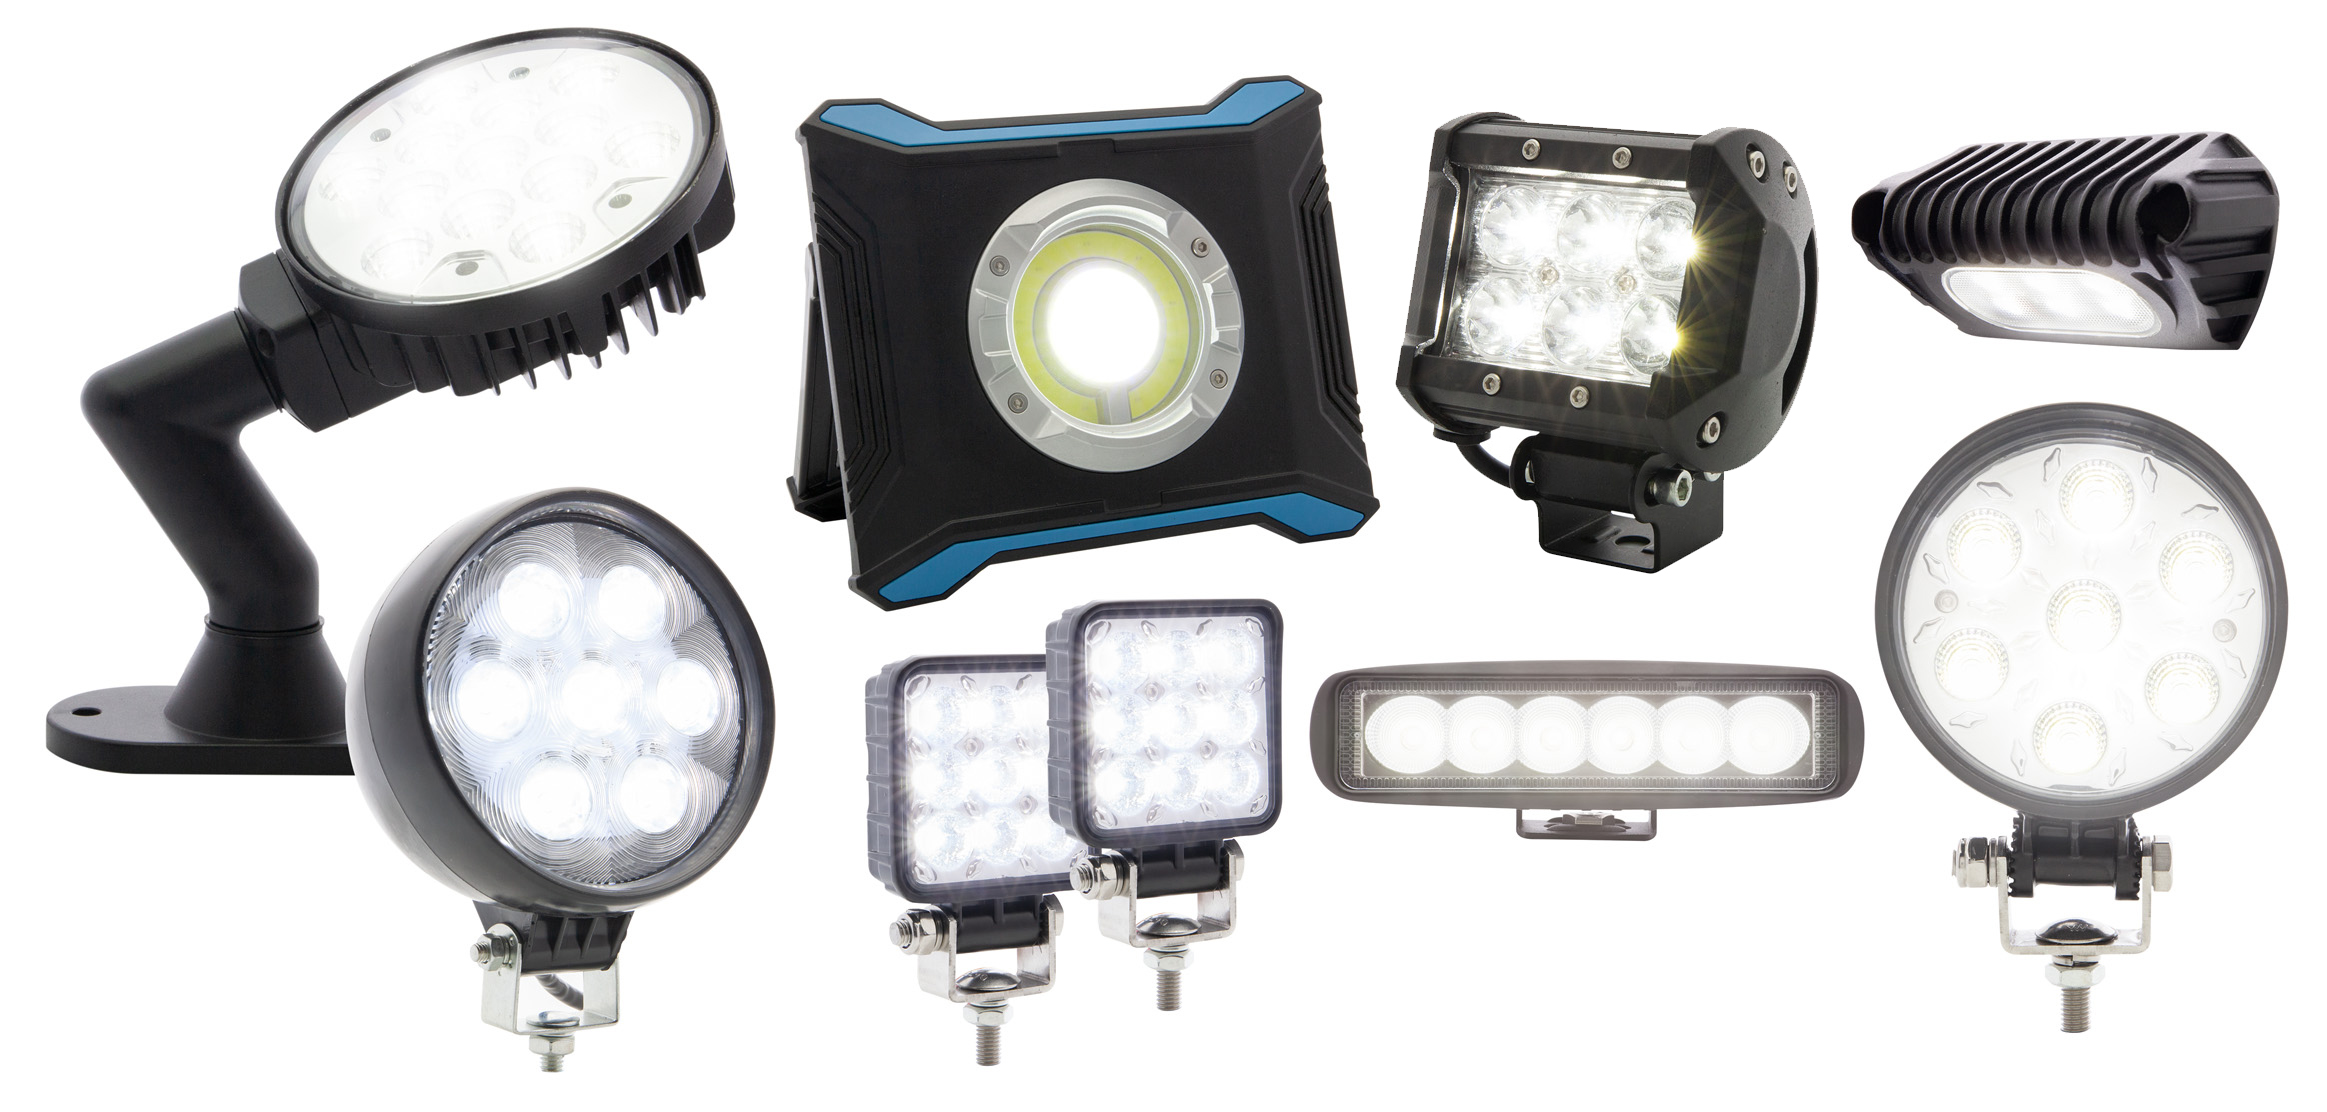 The new lamps range from utility and work lights to scene lights, and even include a freestanding, rechargeable, cordless, multifunctional LED lamp.